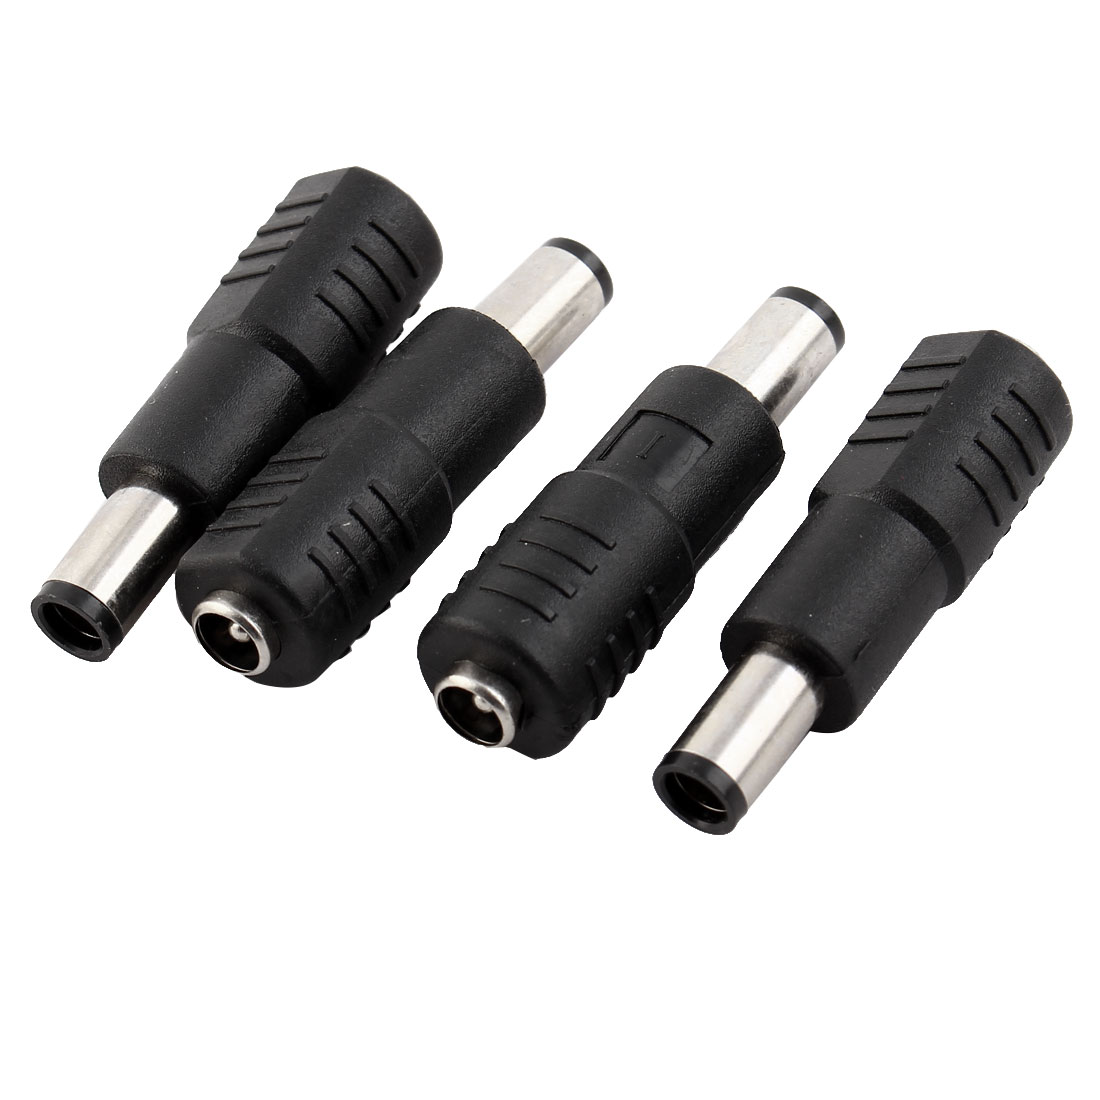 4pcs 5.5x2.1mm Female to 5.5x2.5mm Male DC Power Plug Connector Adapter CP